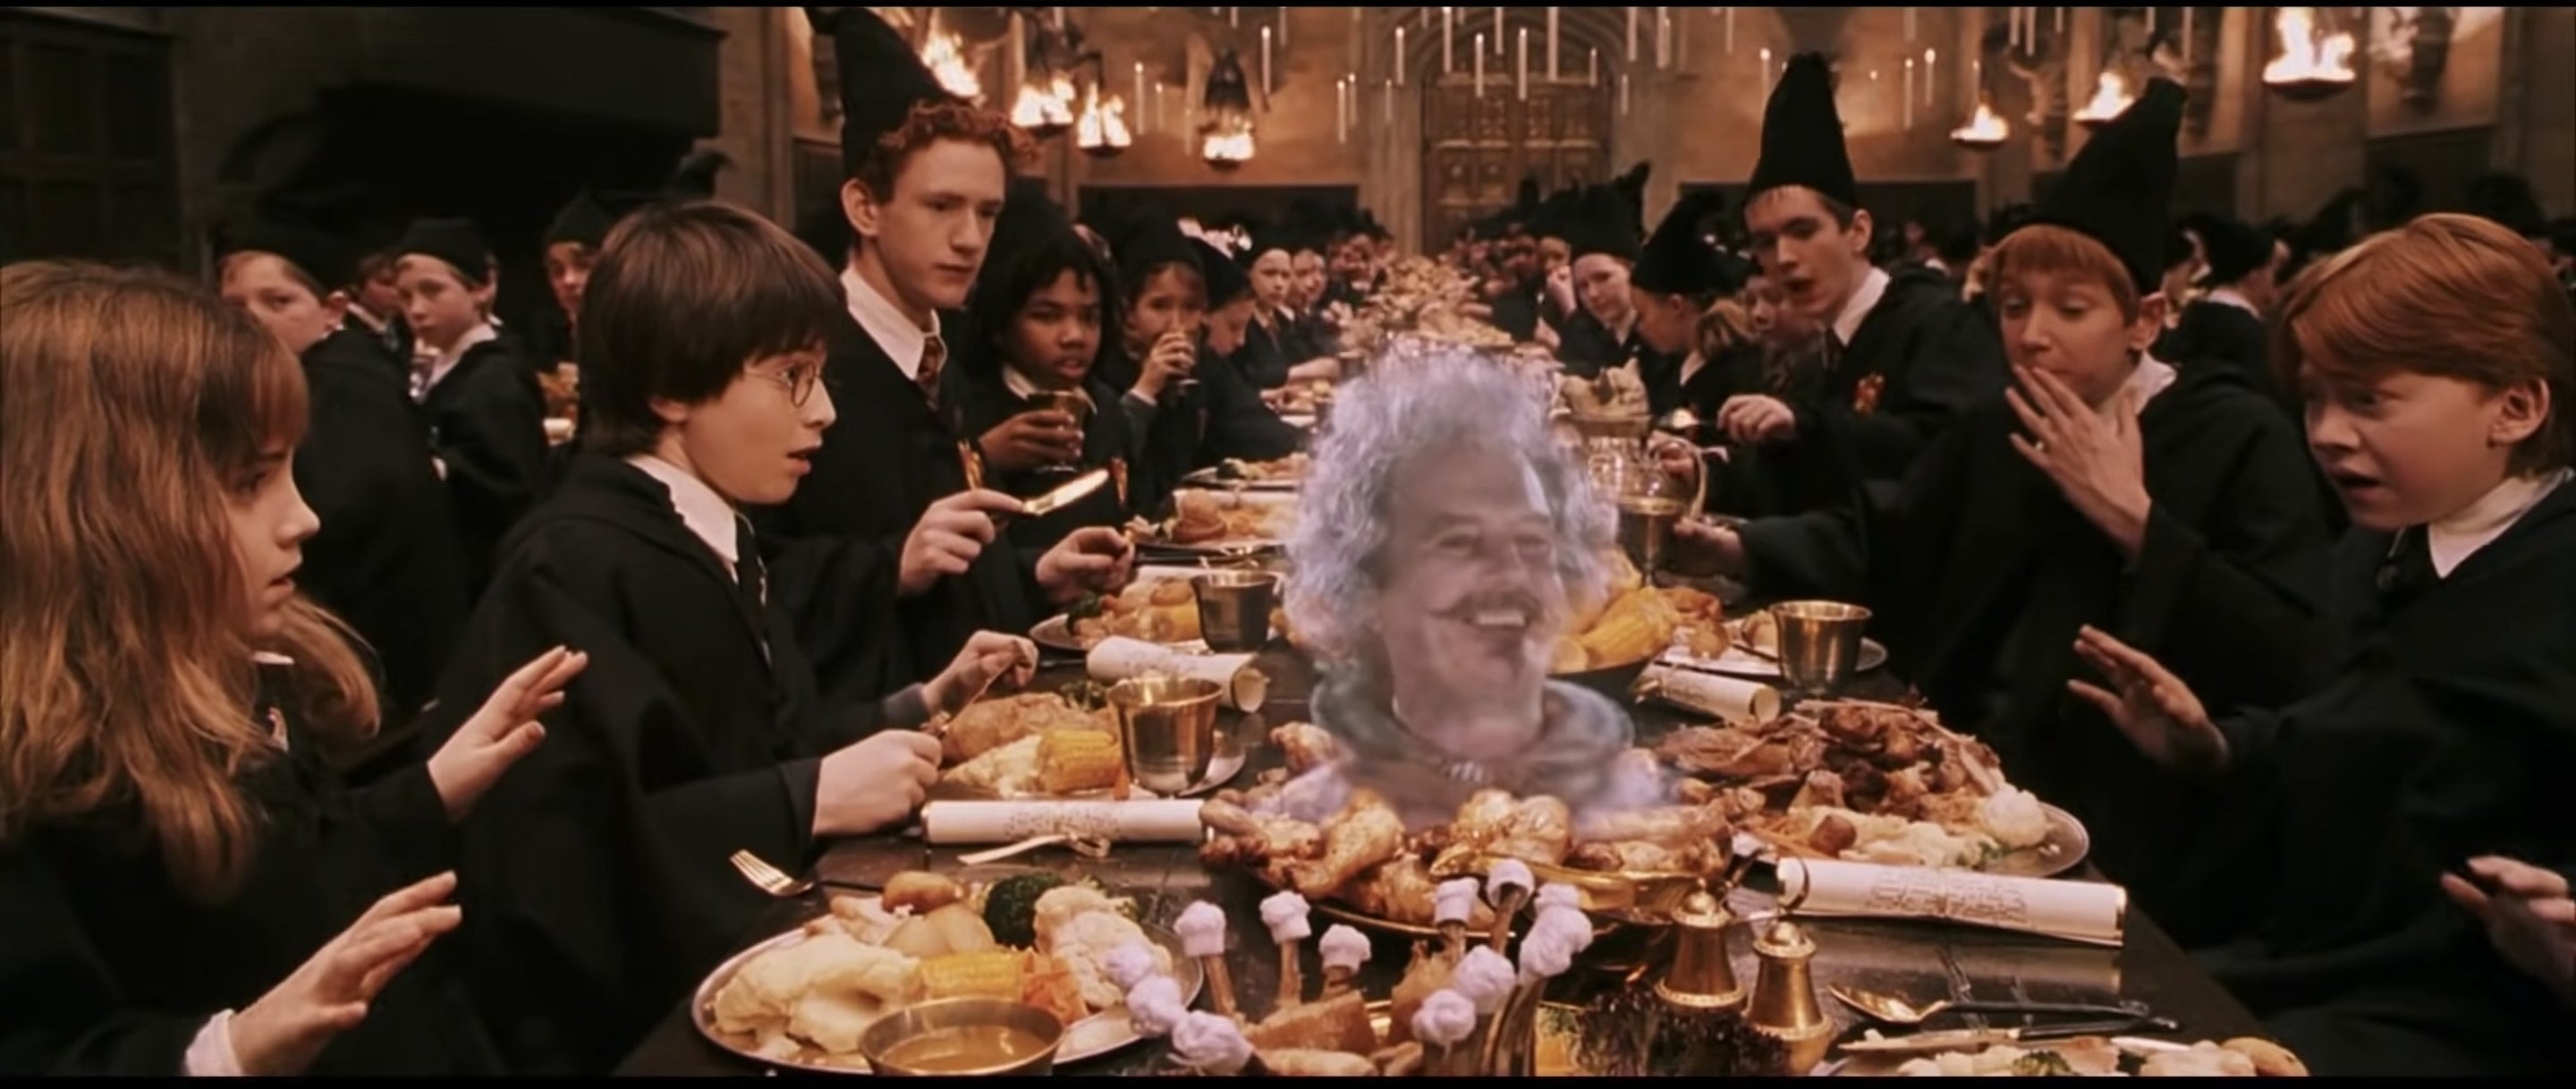 Nearly Headless Nick popping out of table at Hogwarts